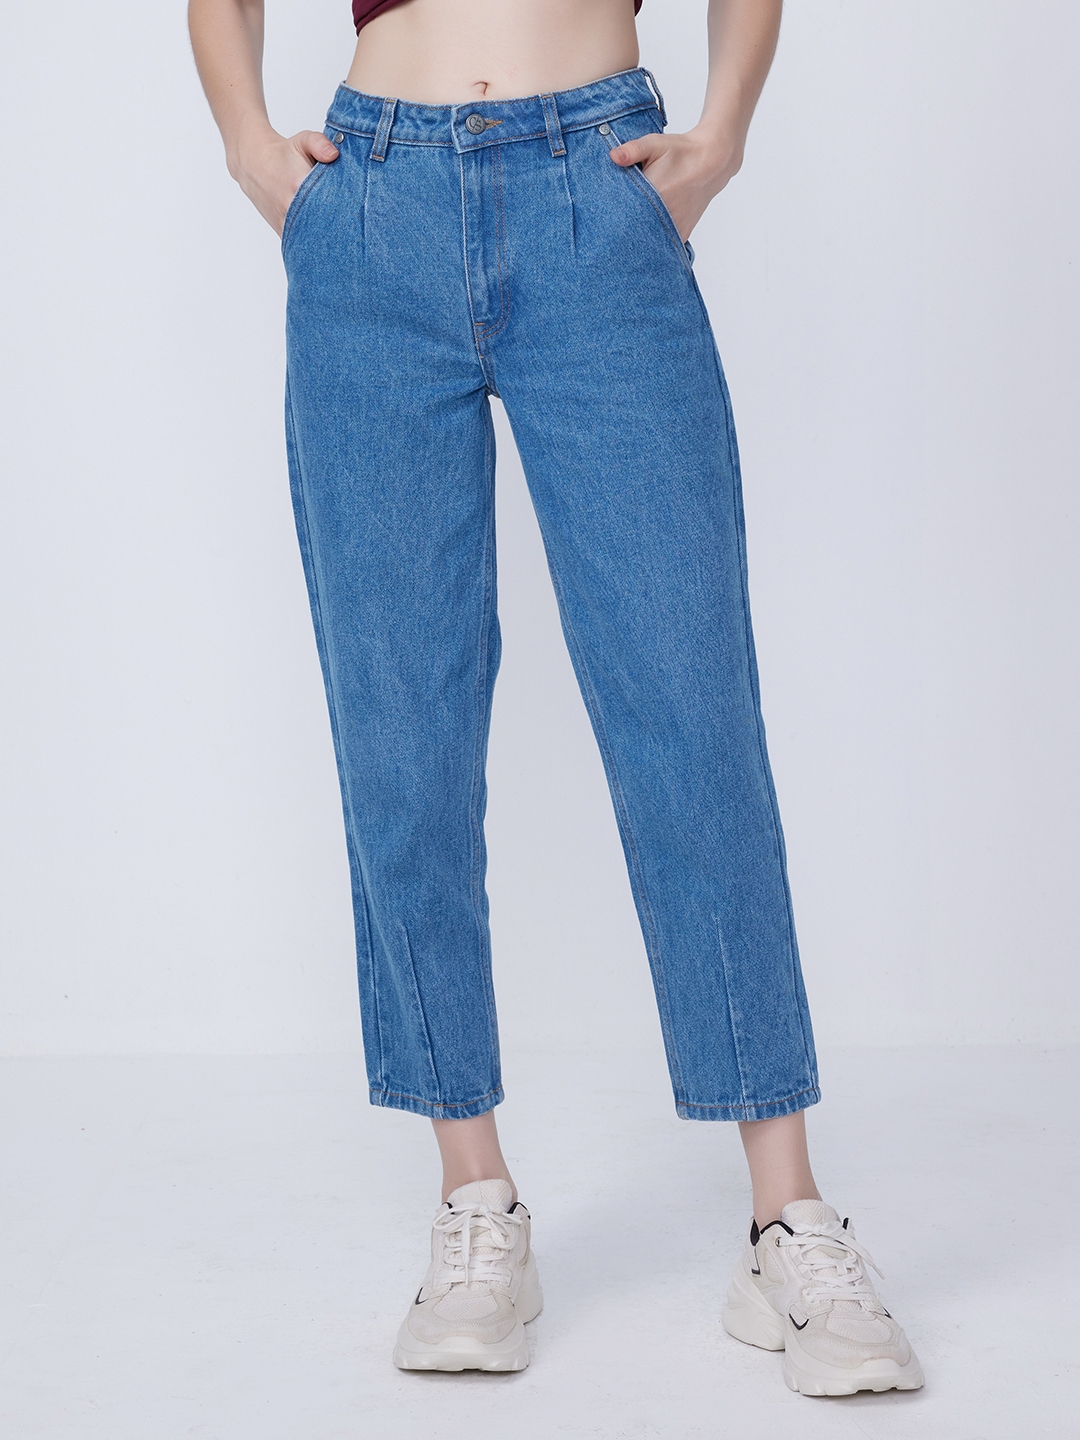 Women's Mom Jeans | Mom Jeans for Teens | Hollister Co.-calidas.vn